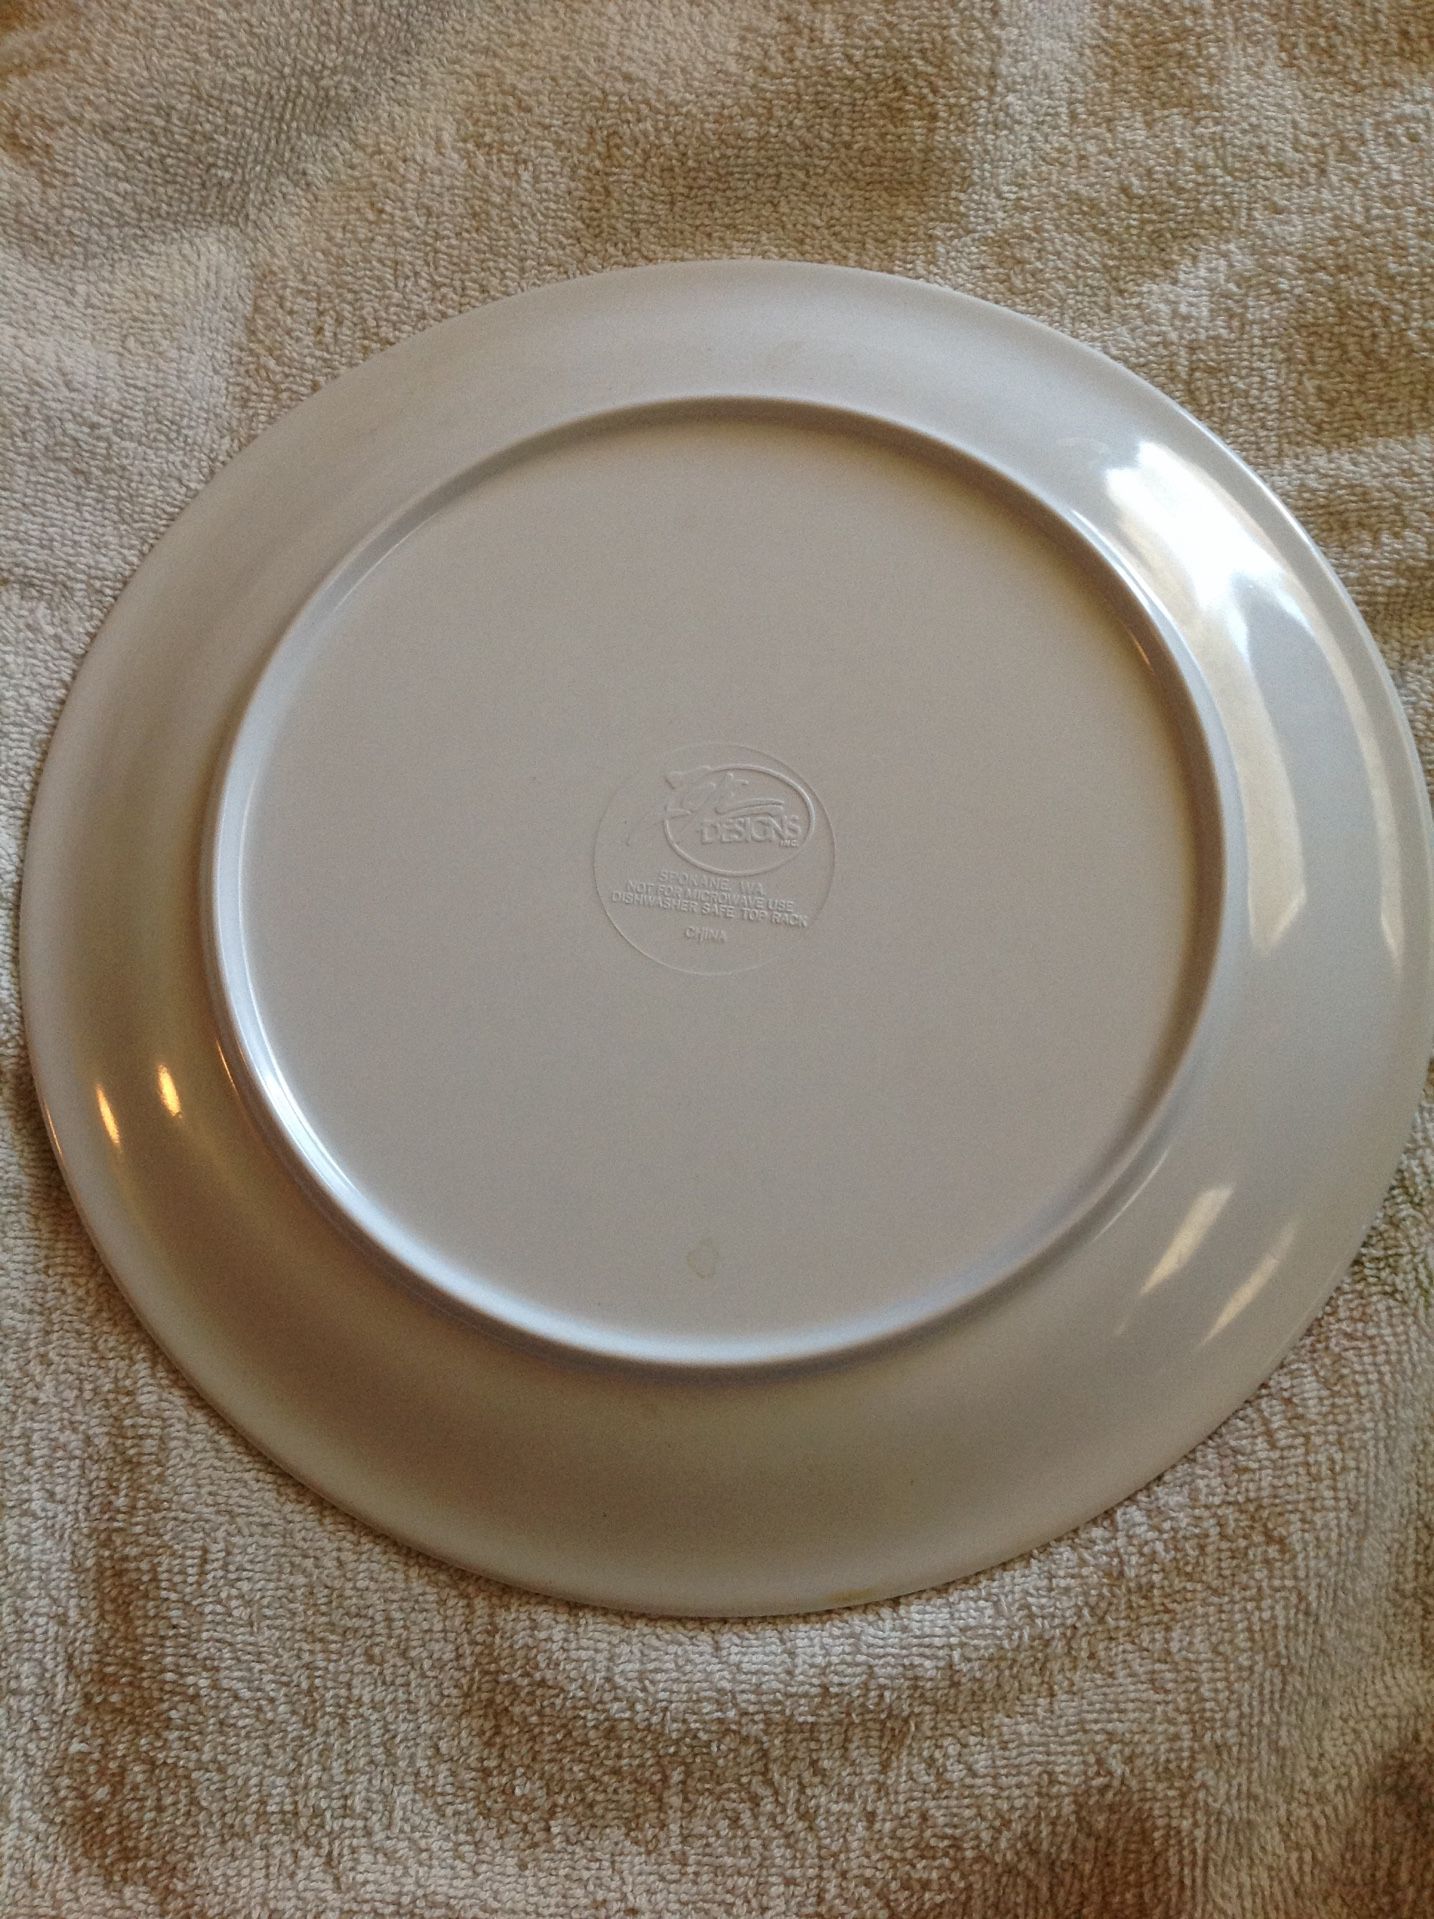 Brand New, Never Used. Looney Tunes Tweety Bird Collectible Plastic Dinner Plate